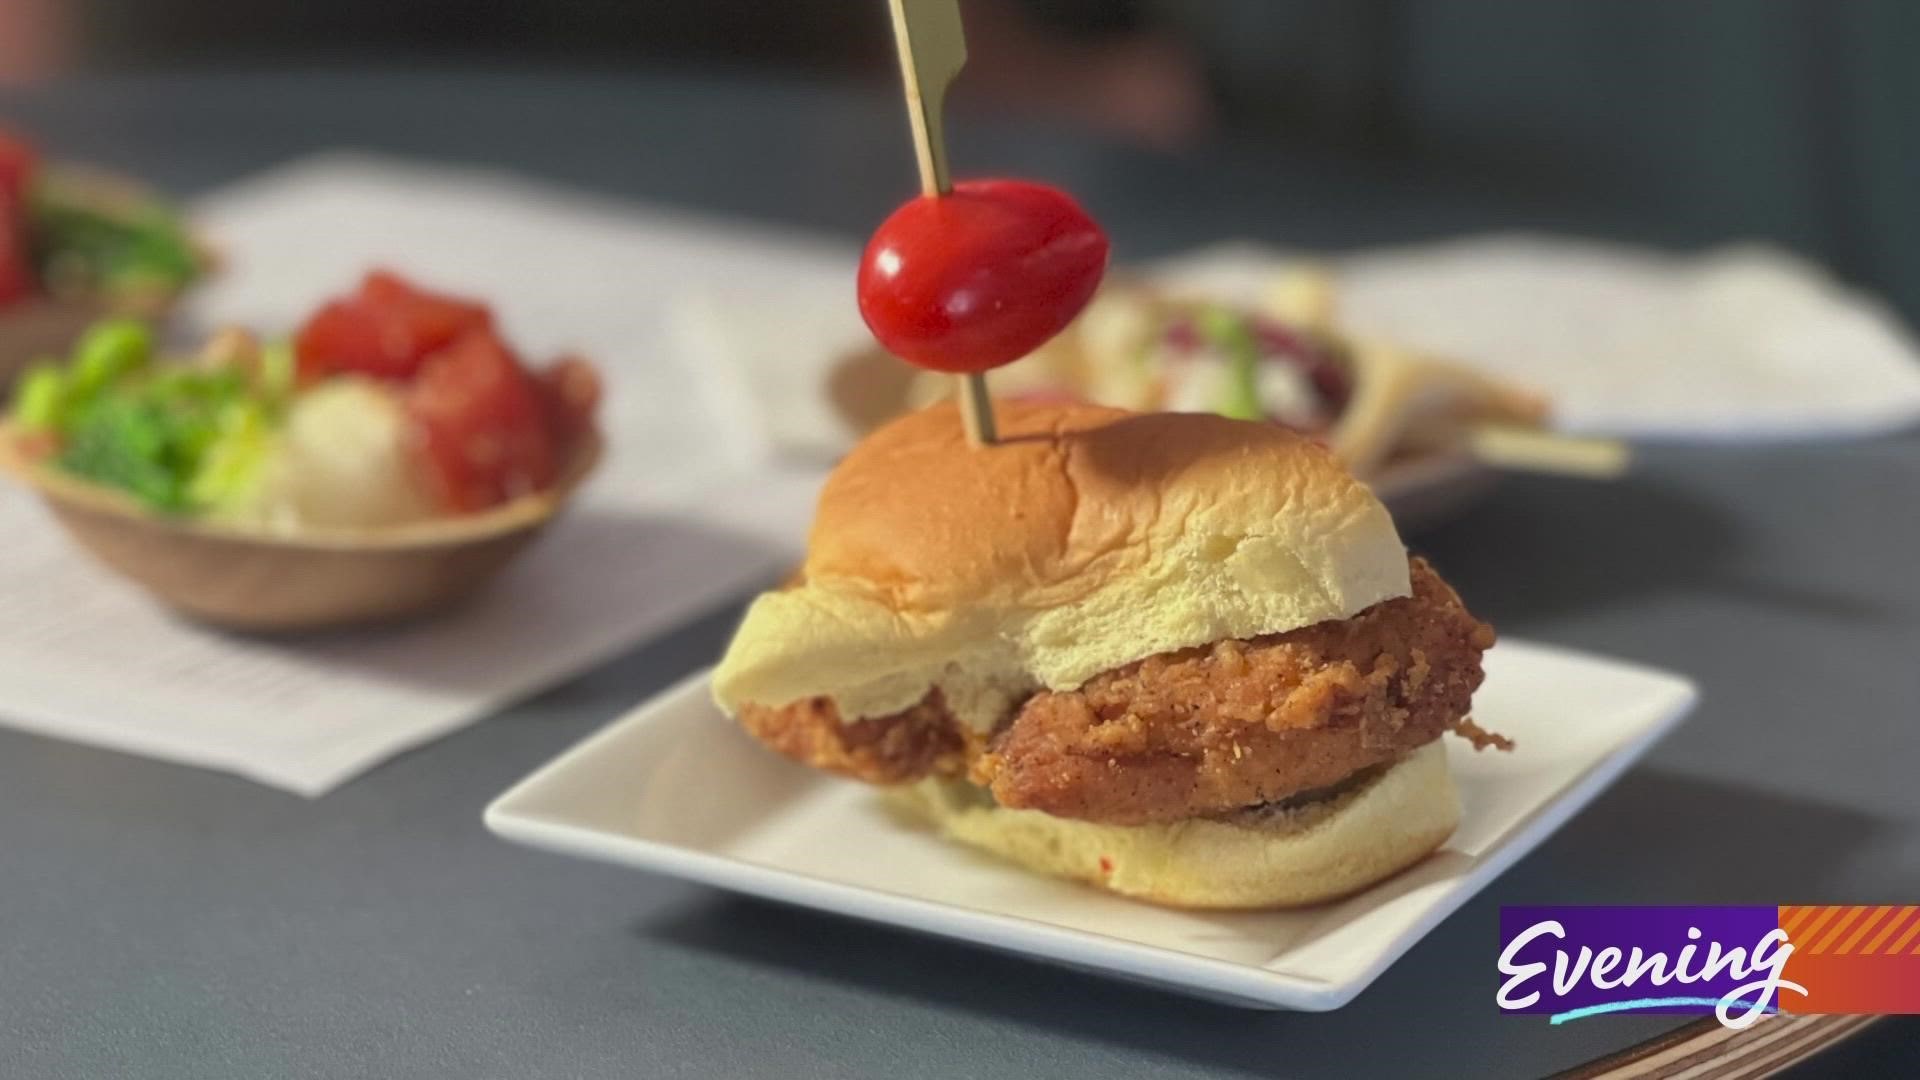 New menu offerings were unveiled Wednesday for the 2022 season, featuring restaurant-quality options from local restaurants.